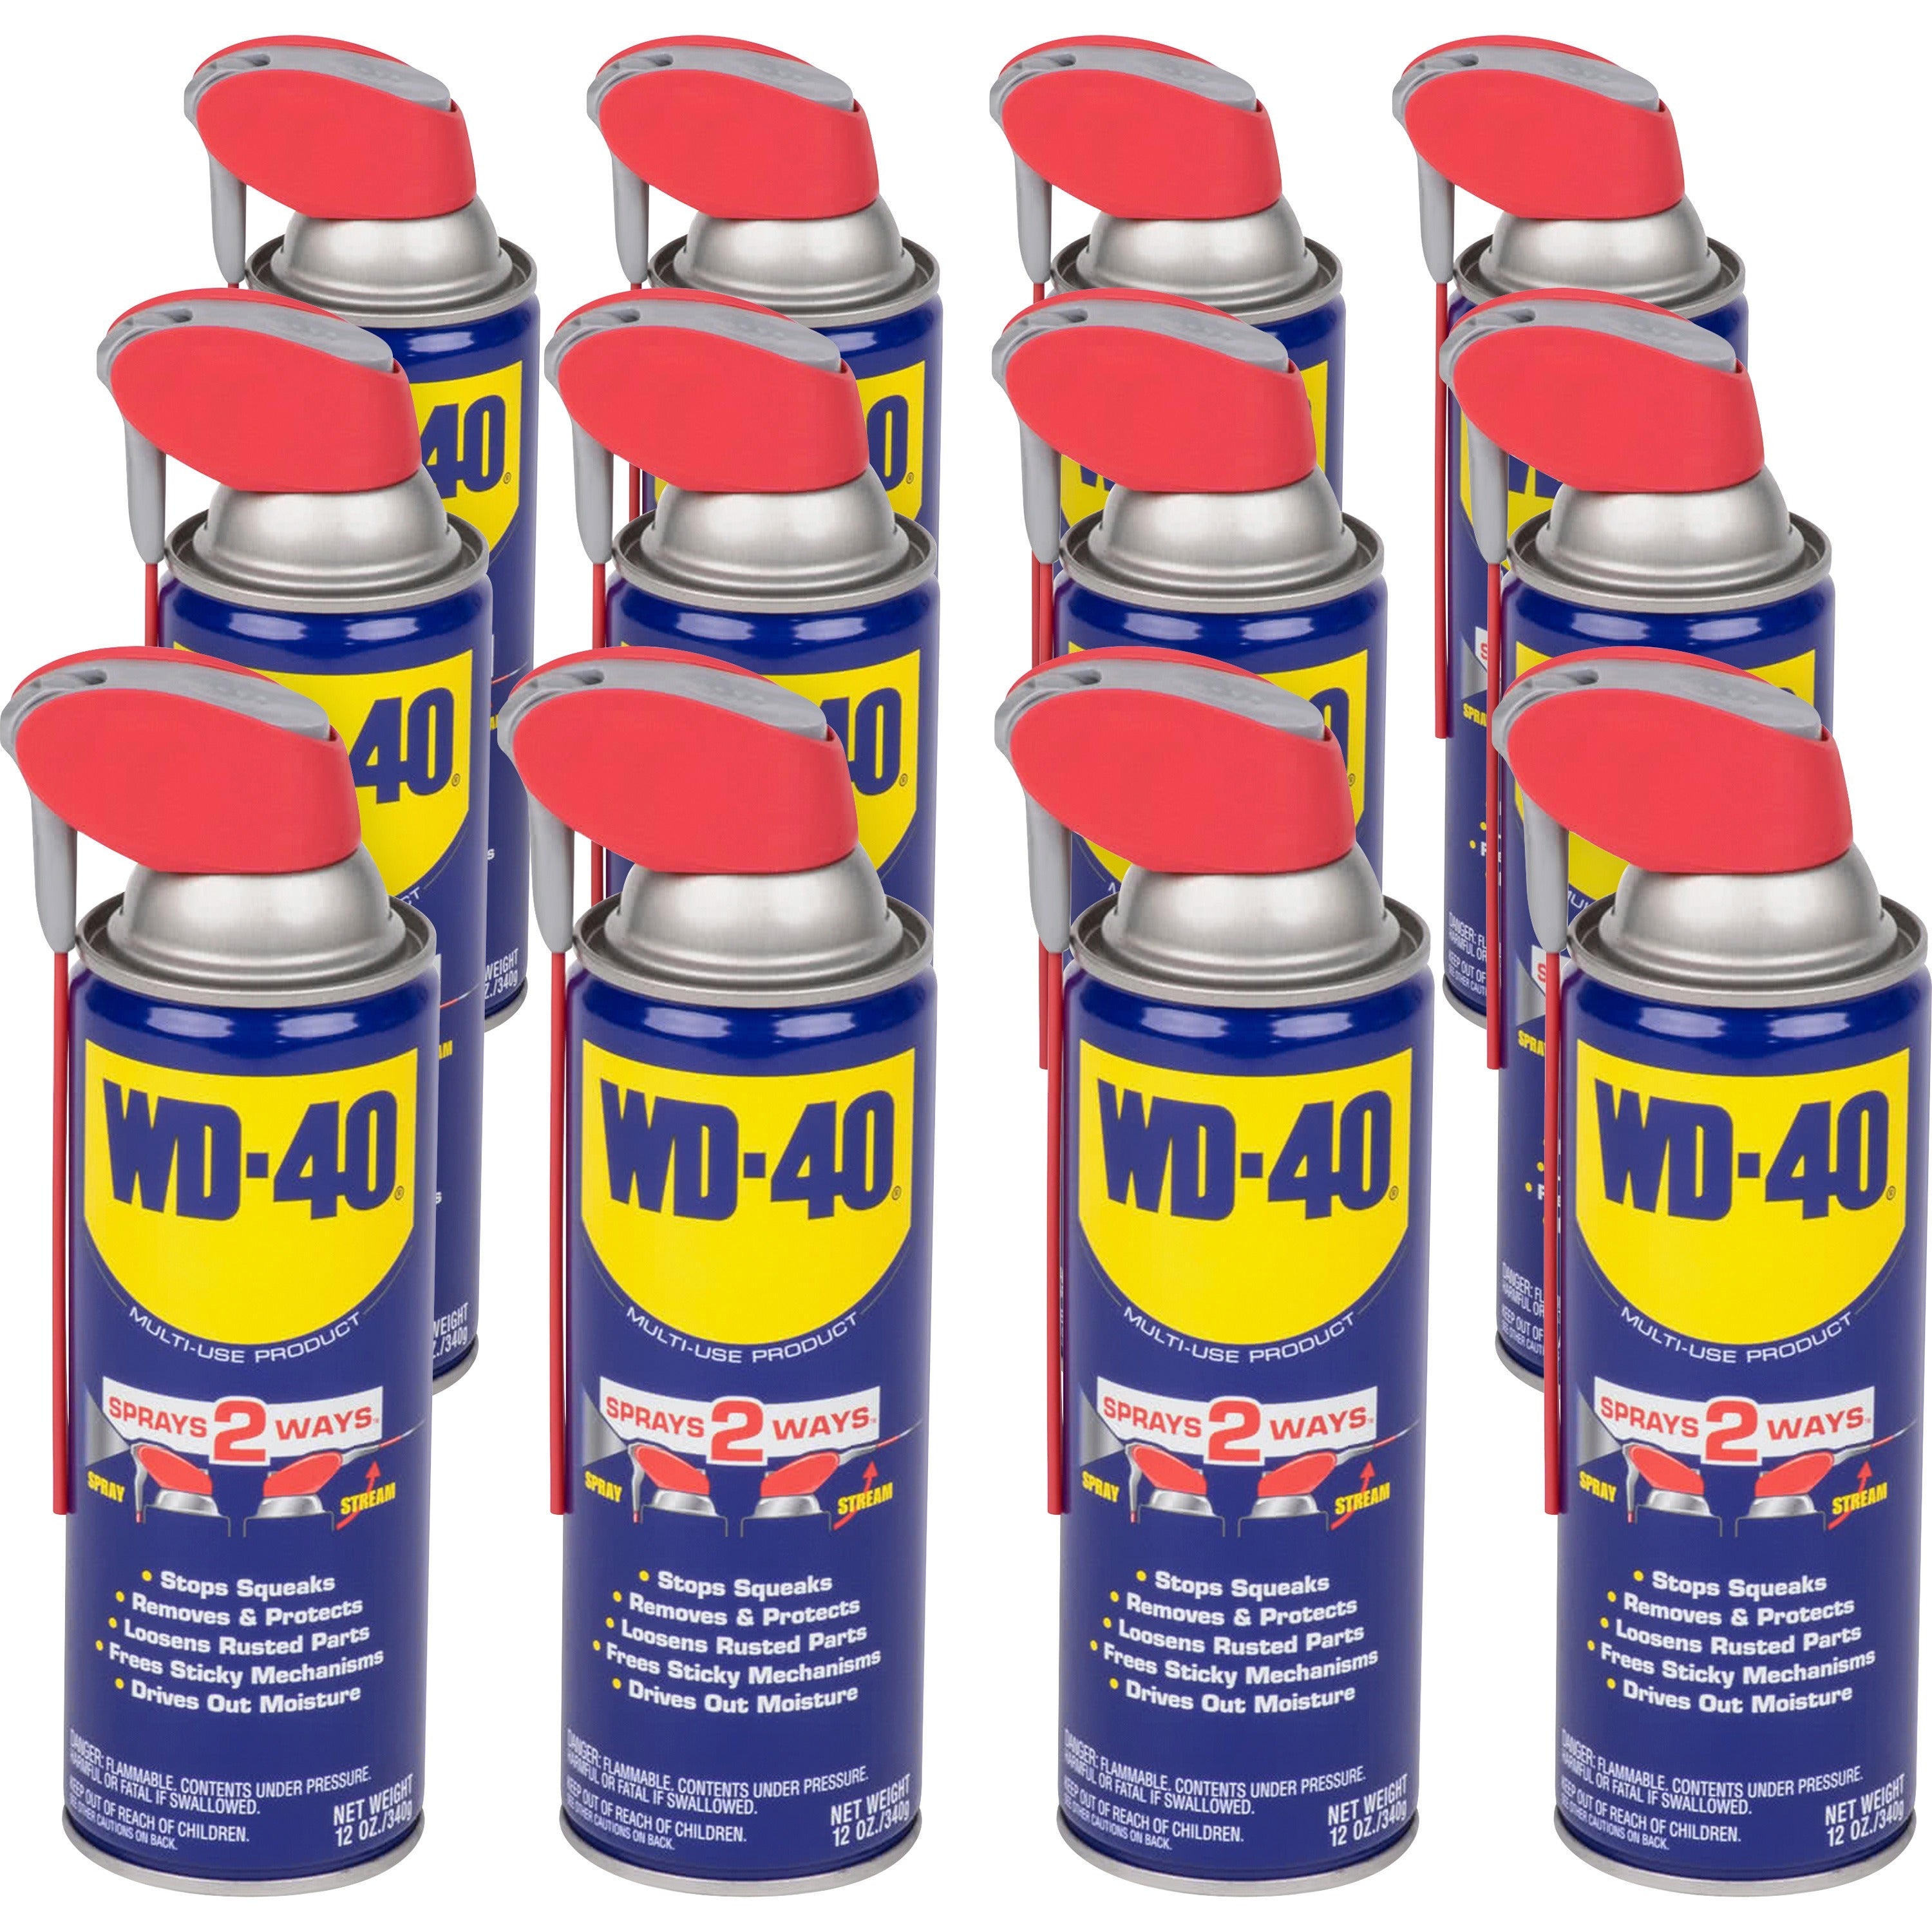 wd-40-multi-use-product-lubricant-12-fl-oz-corrosion-resistant-rust-resistant-12-carton_wdf490057ct - 1